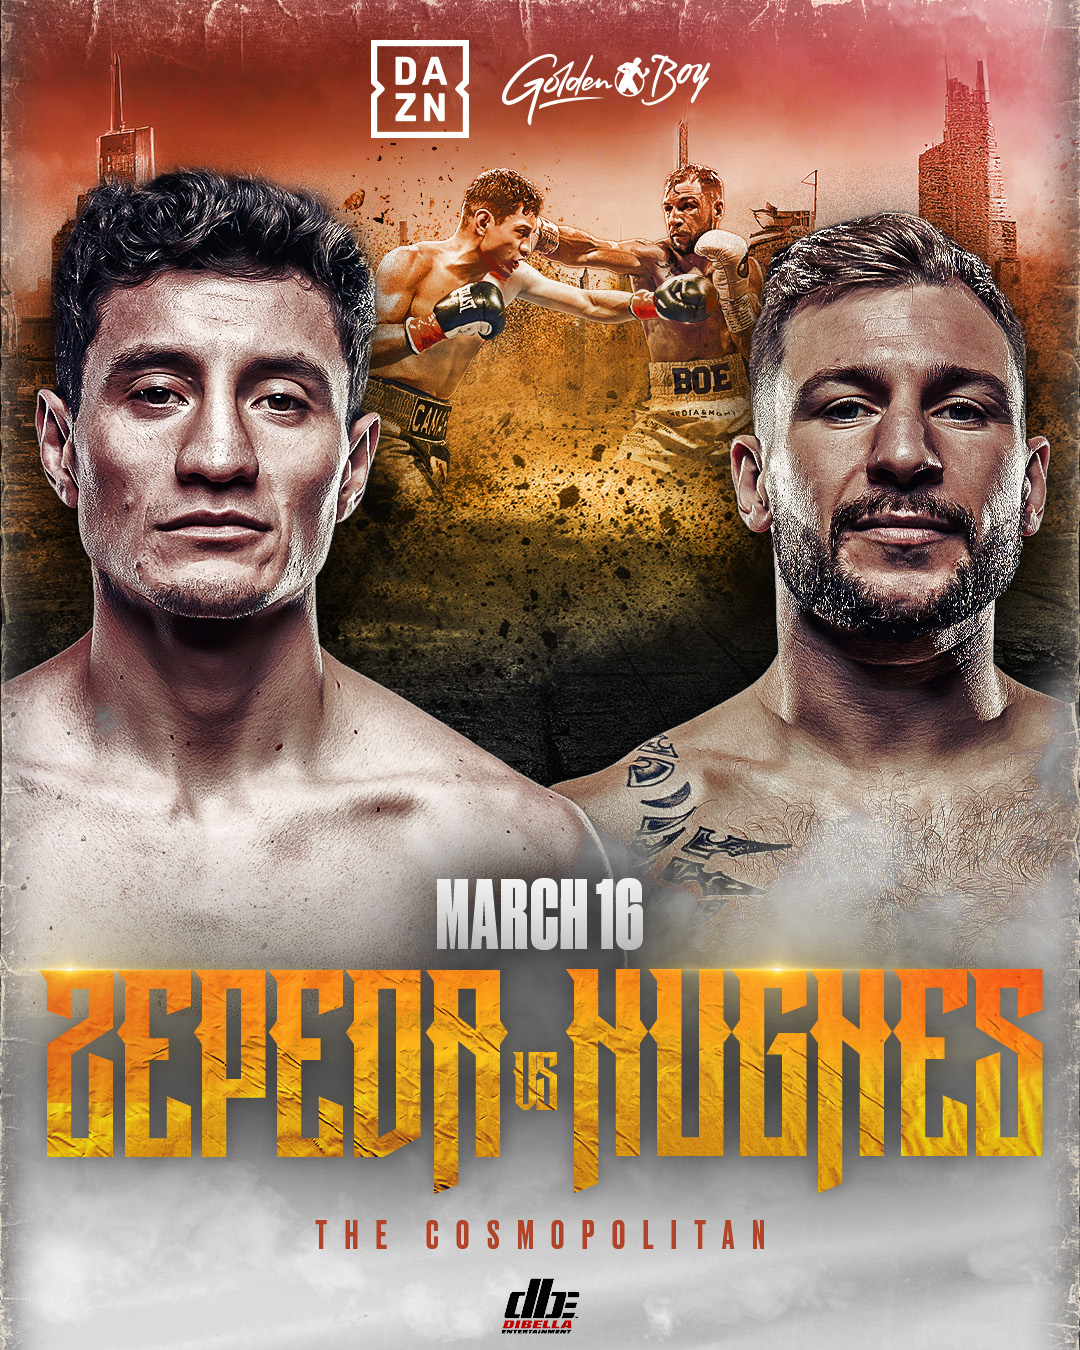 WORLD CHAMPIONSHIP BOUND: THE KNOCKOUT MACHINE WILLIAM “EL CAMARÓN” ZEPEDA TO FACE FORMER WORLD CHAMPION MAXI “MAXIMUS” HUGHES IN IBF AND WBA ELIMINATOR FIGHT